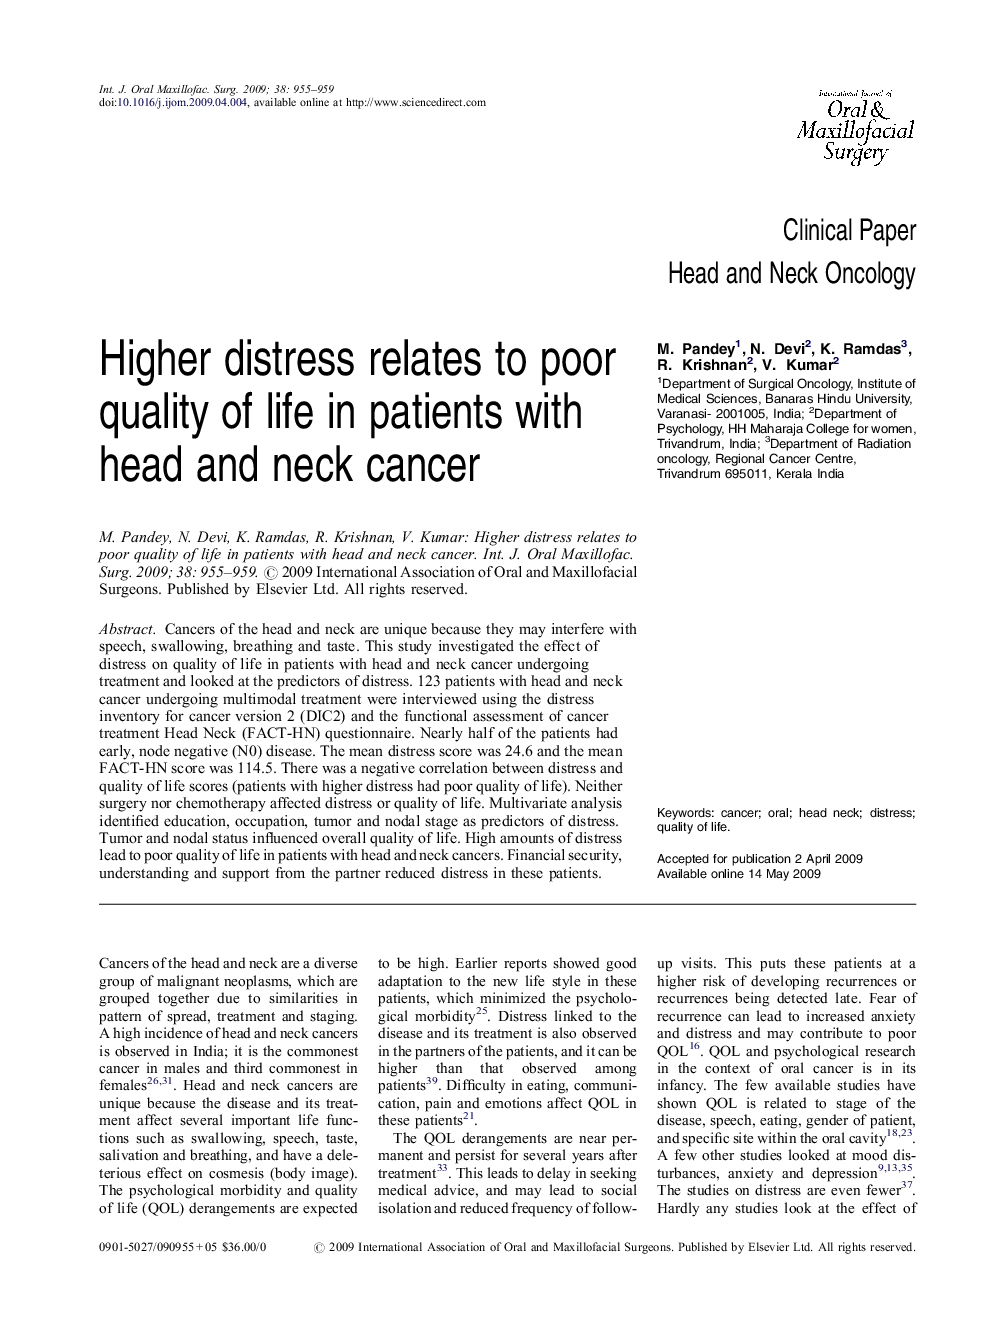 Higher distress relates to poor quality of life in patients with head and neck cancer